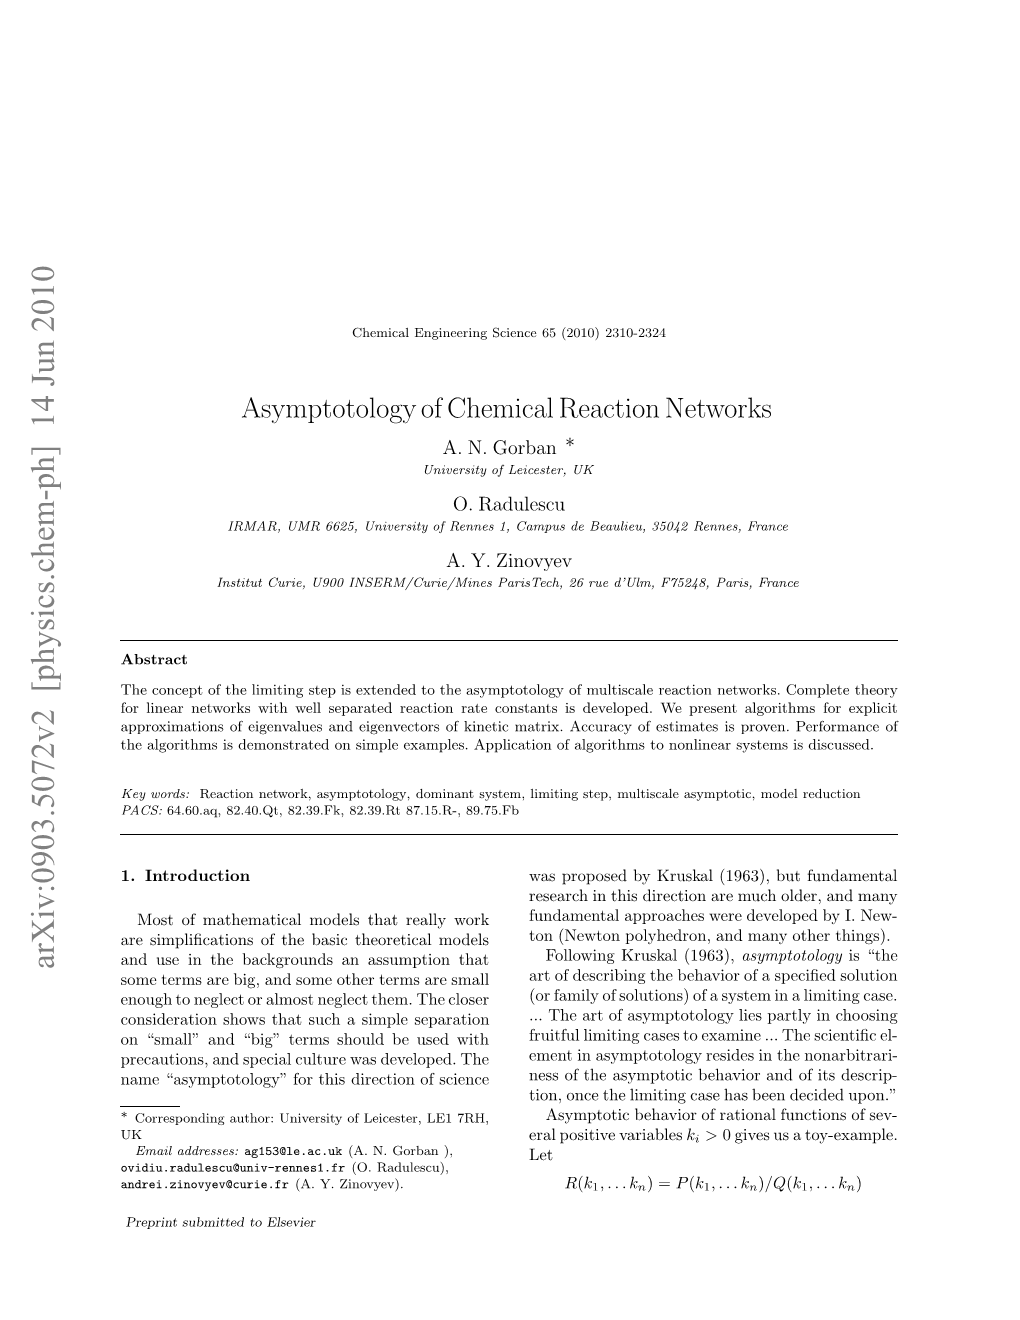 Asymptotology of Chemical Reaction Networks